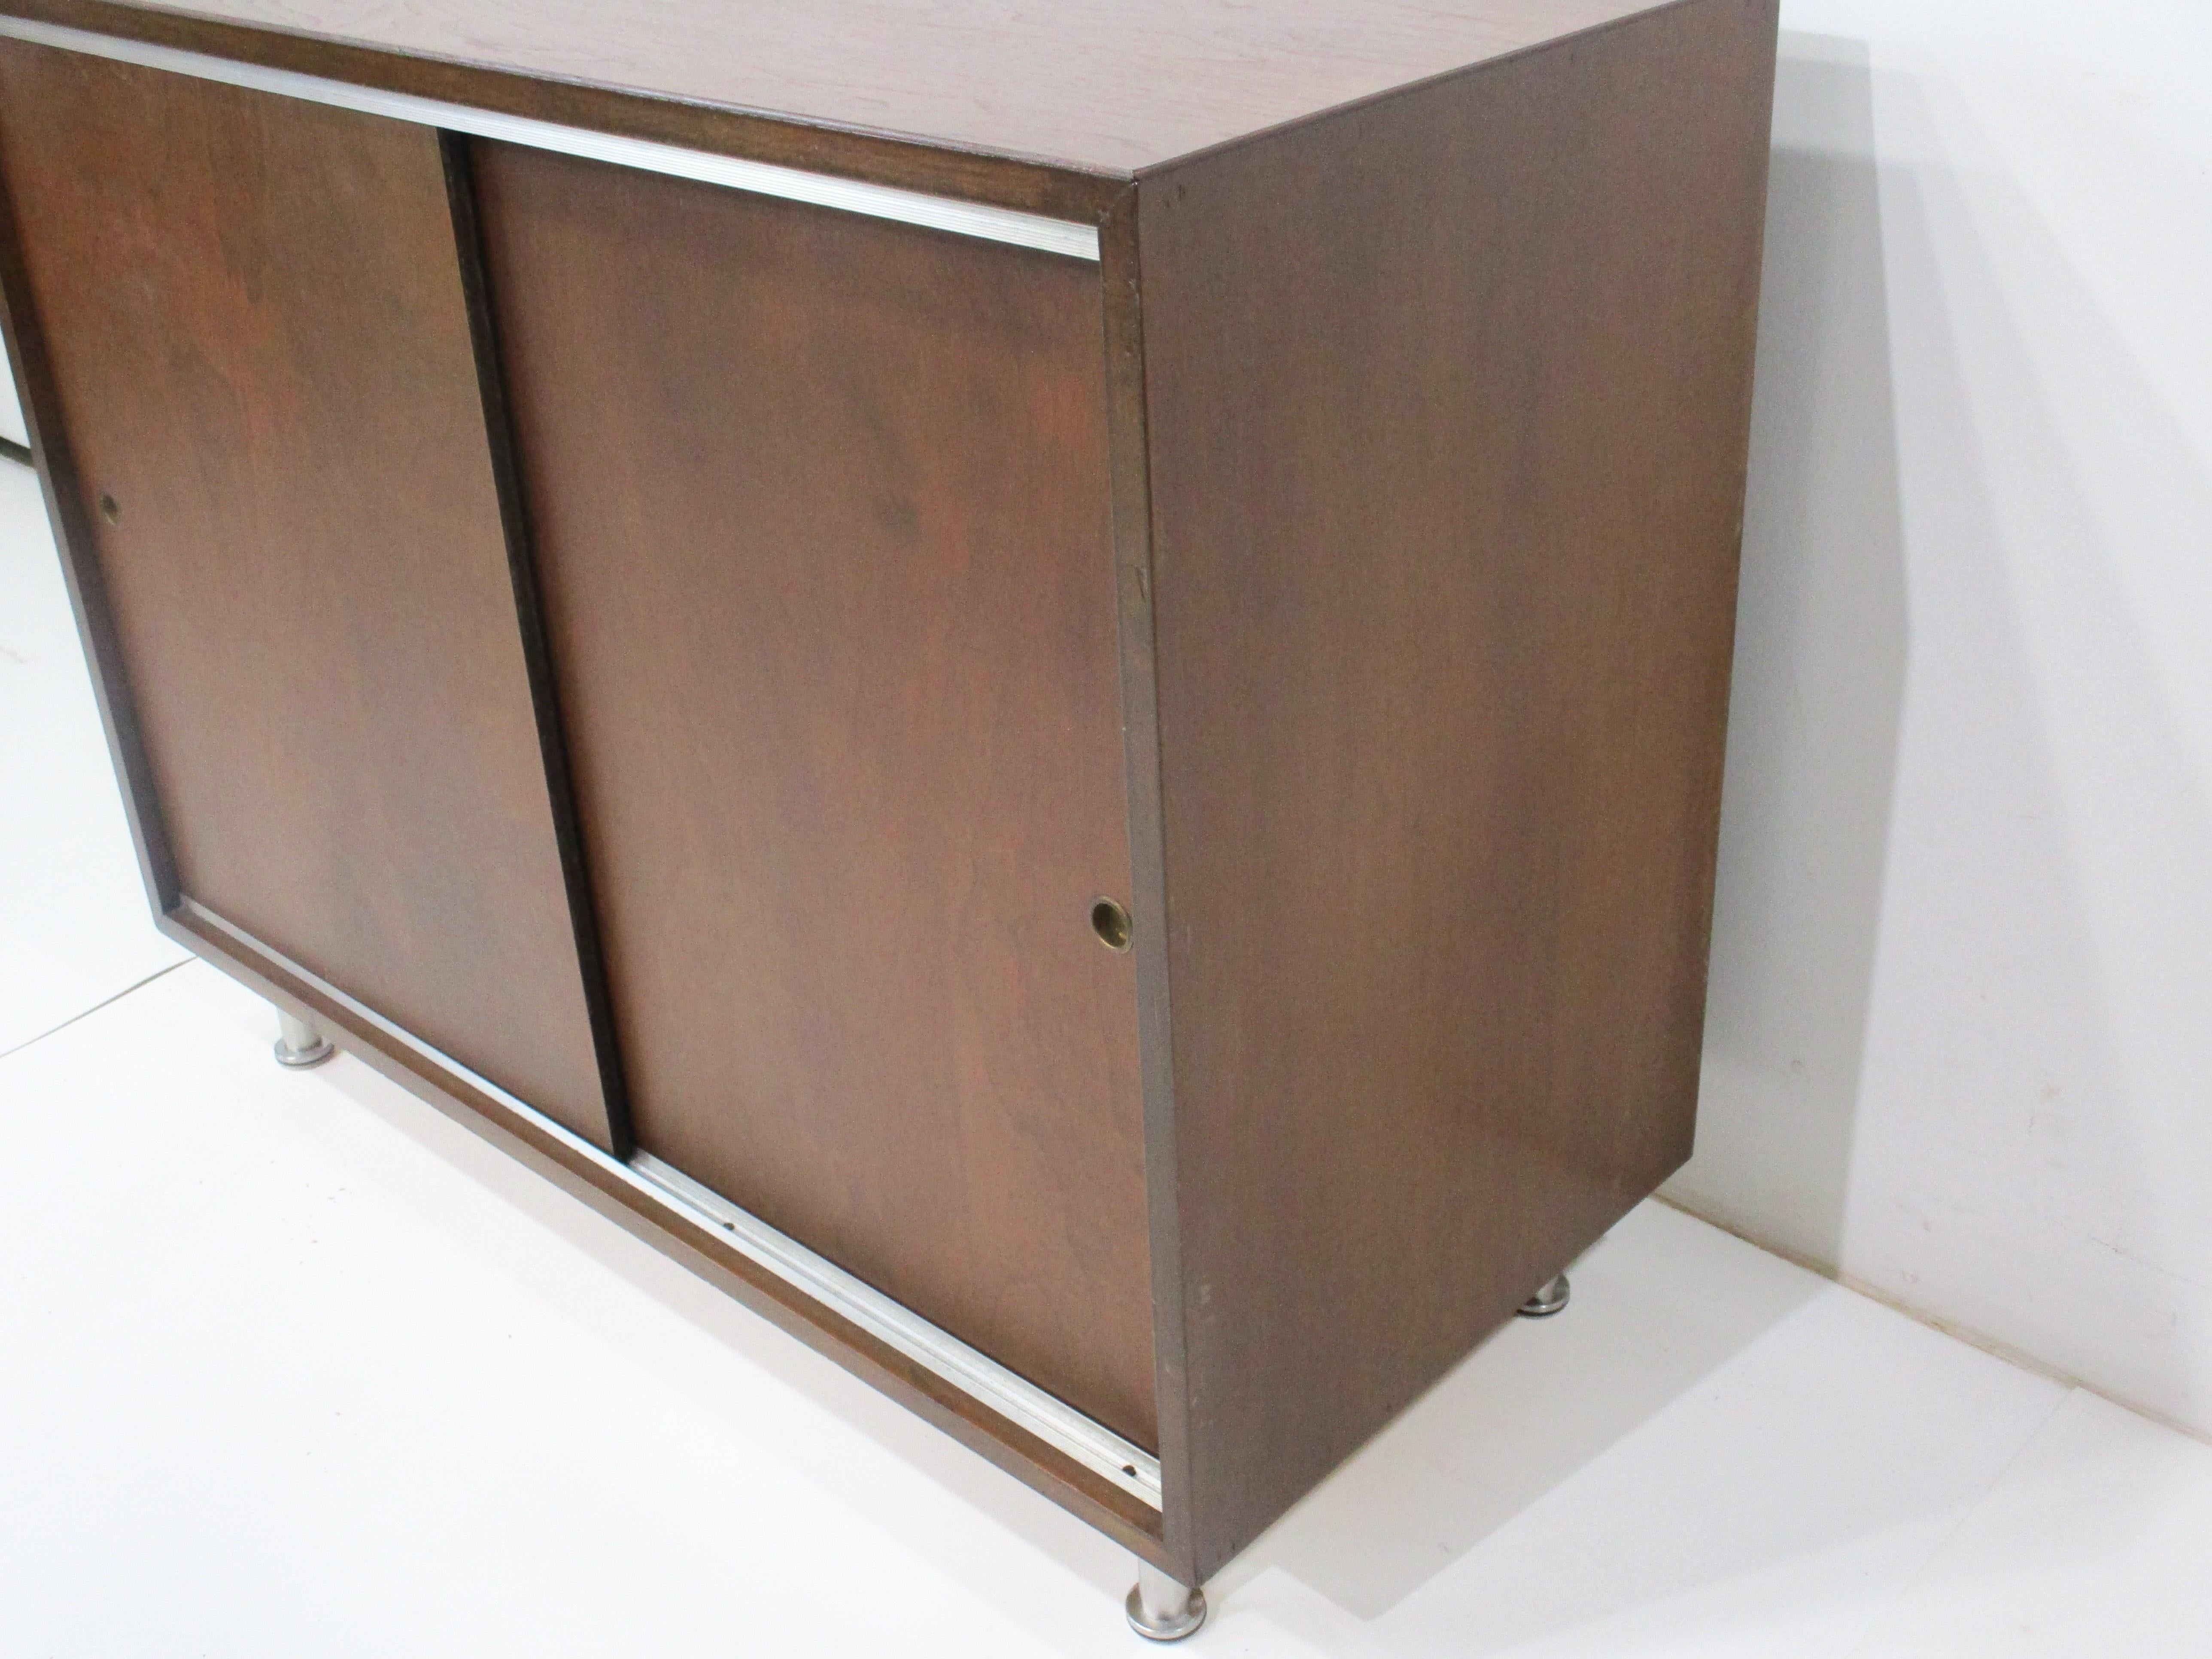 A smaller scaled walnut credenza with double sliding doors and inside one long adjustable shelve . The details of ribbed aluminum strips to the top and bottom edge and brushed aluminum legs give the piece that extra pop . Great for a thigh space or